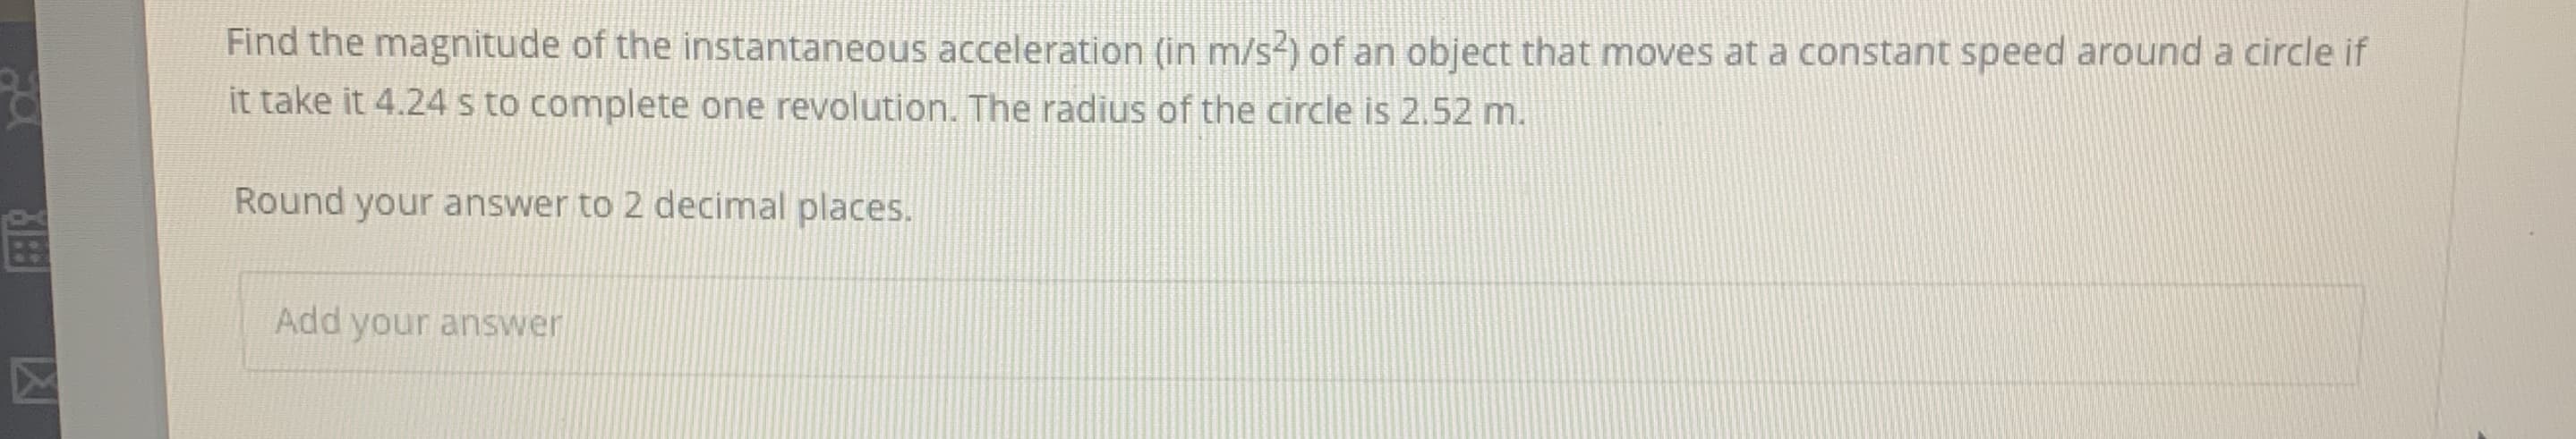 Find the magnitude of the instantaneous acceleration (in m/s²) of an object that moves at a constant speed around a circle if
it take it 4.24 s to complete one revolution. The radius of the circle is 2.52 m.
